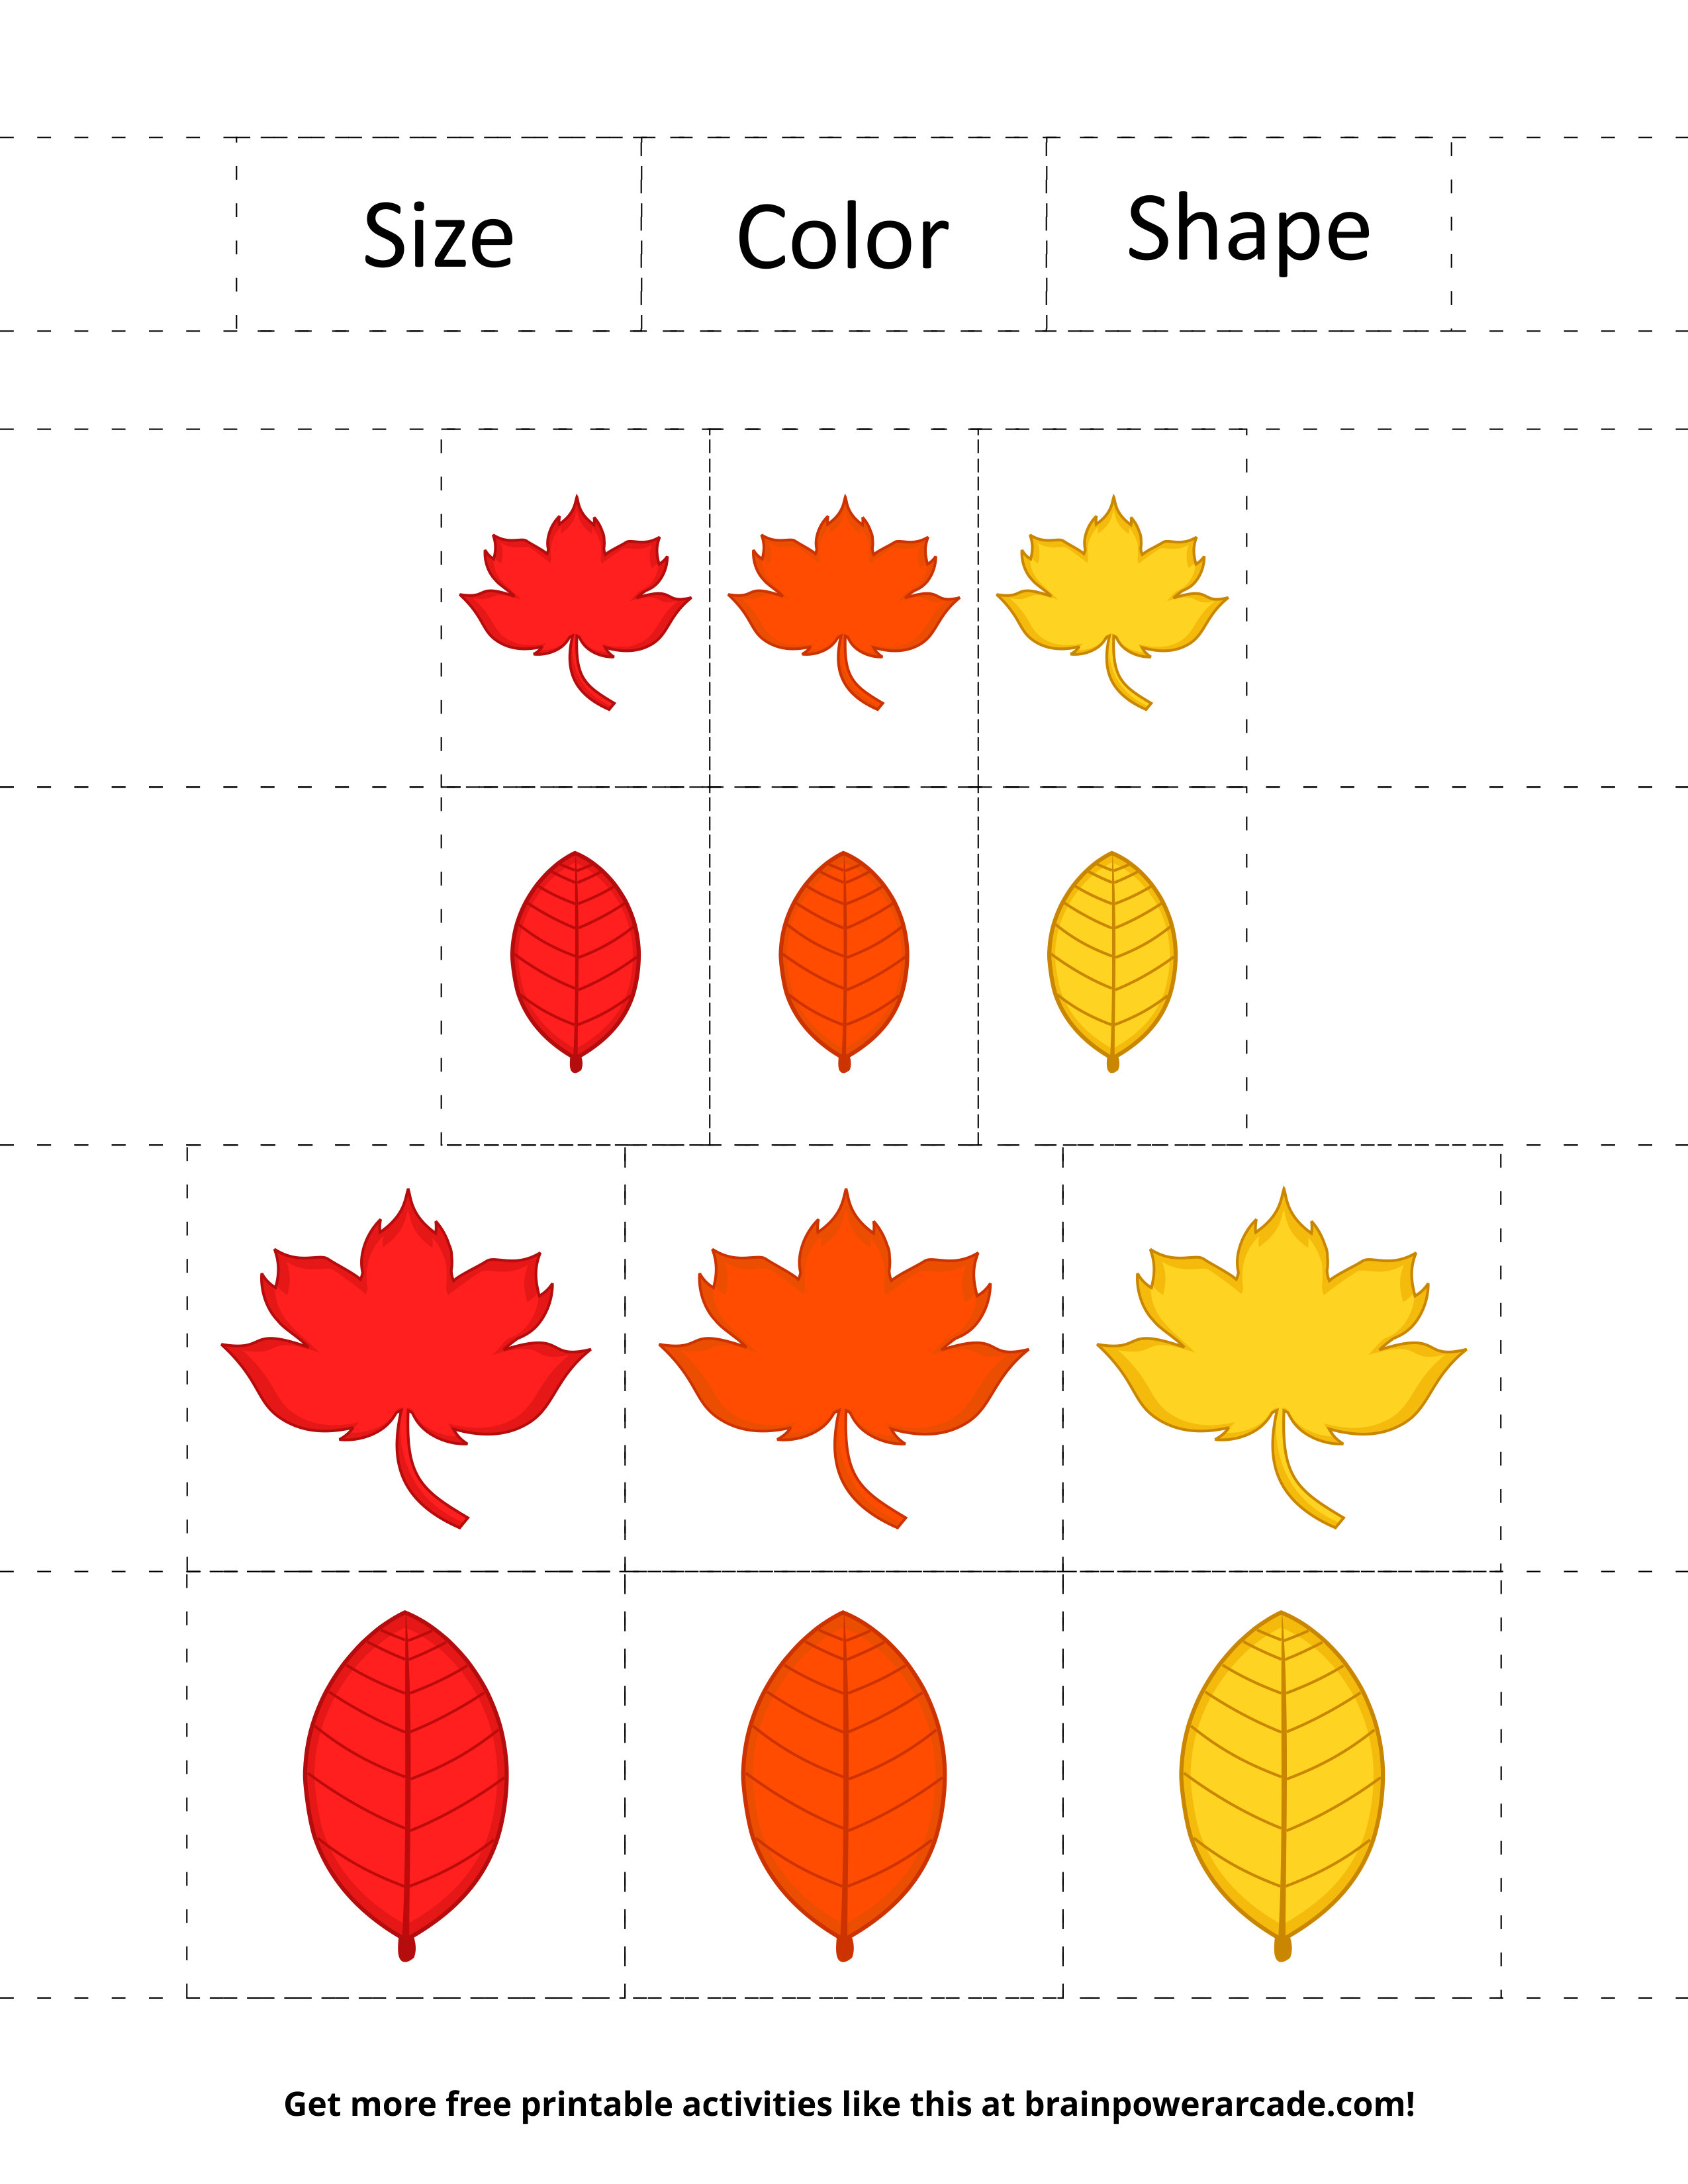 Sort Fall Leaves By Color, Size, or Shape (Page 2)